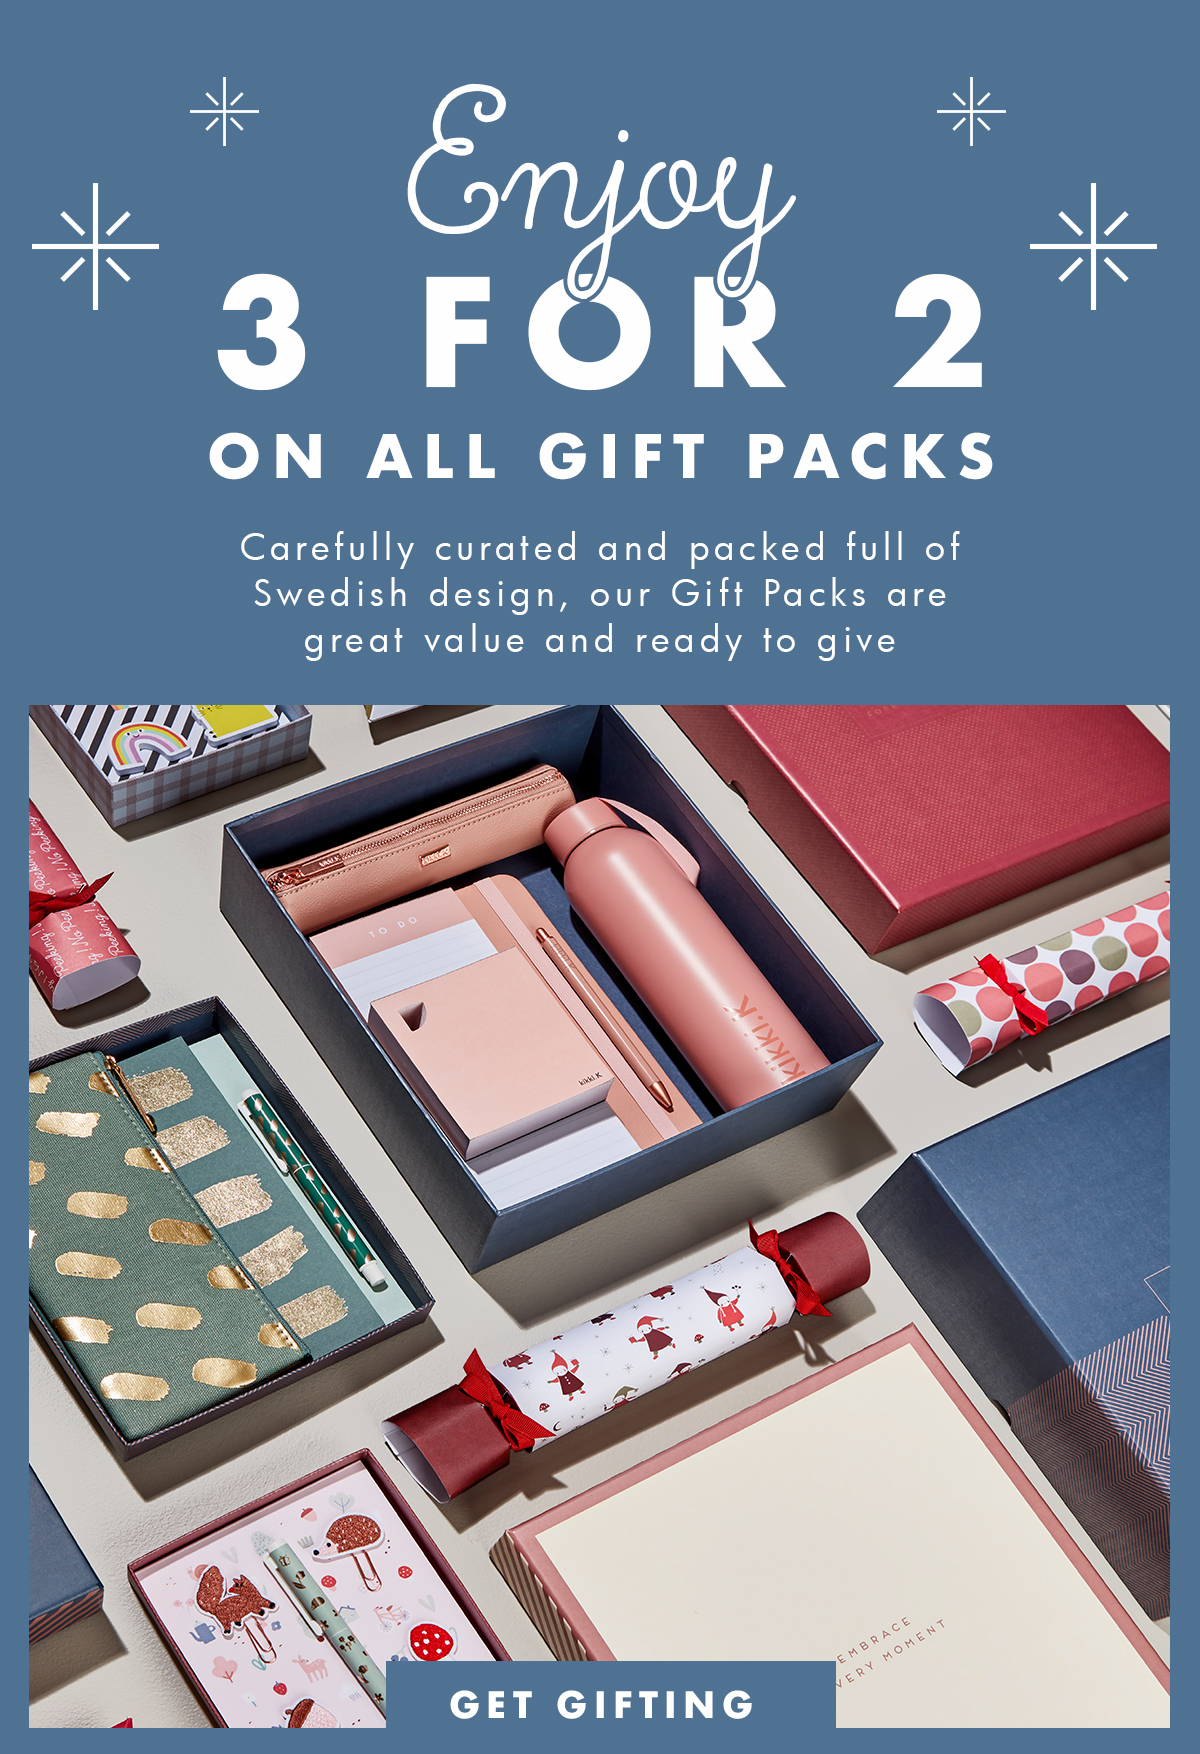 Enjoy 3 for 2 on all gift packs. Get gifting. 